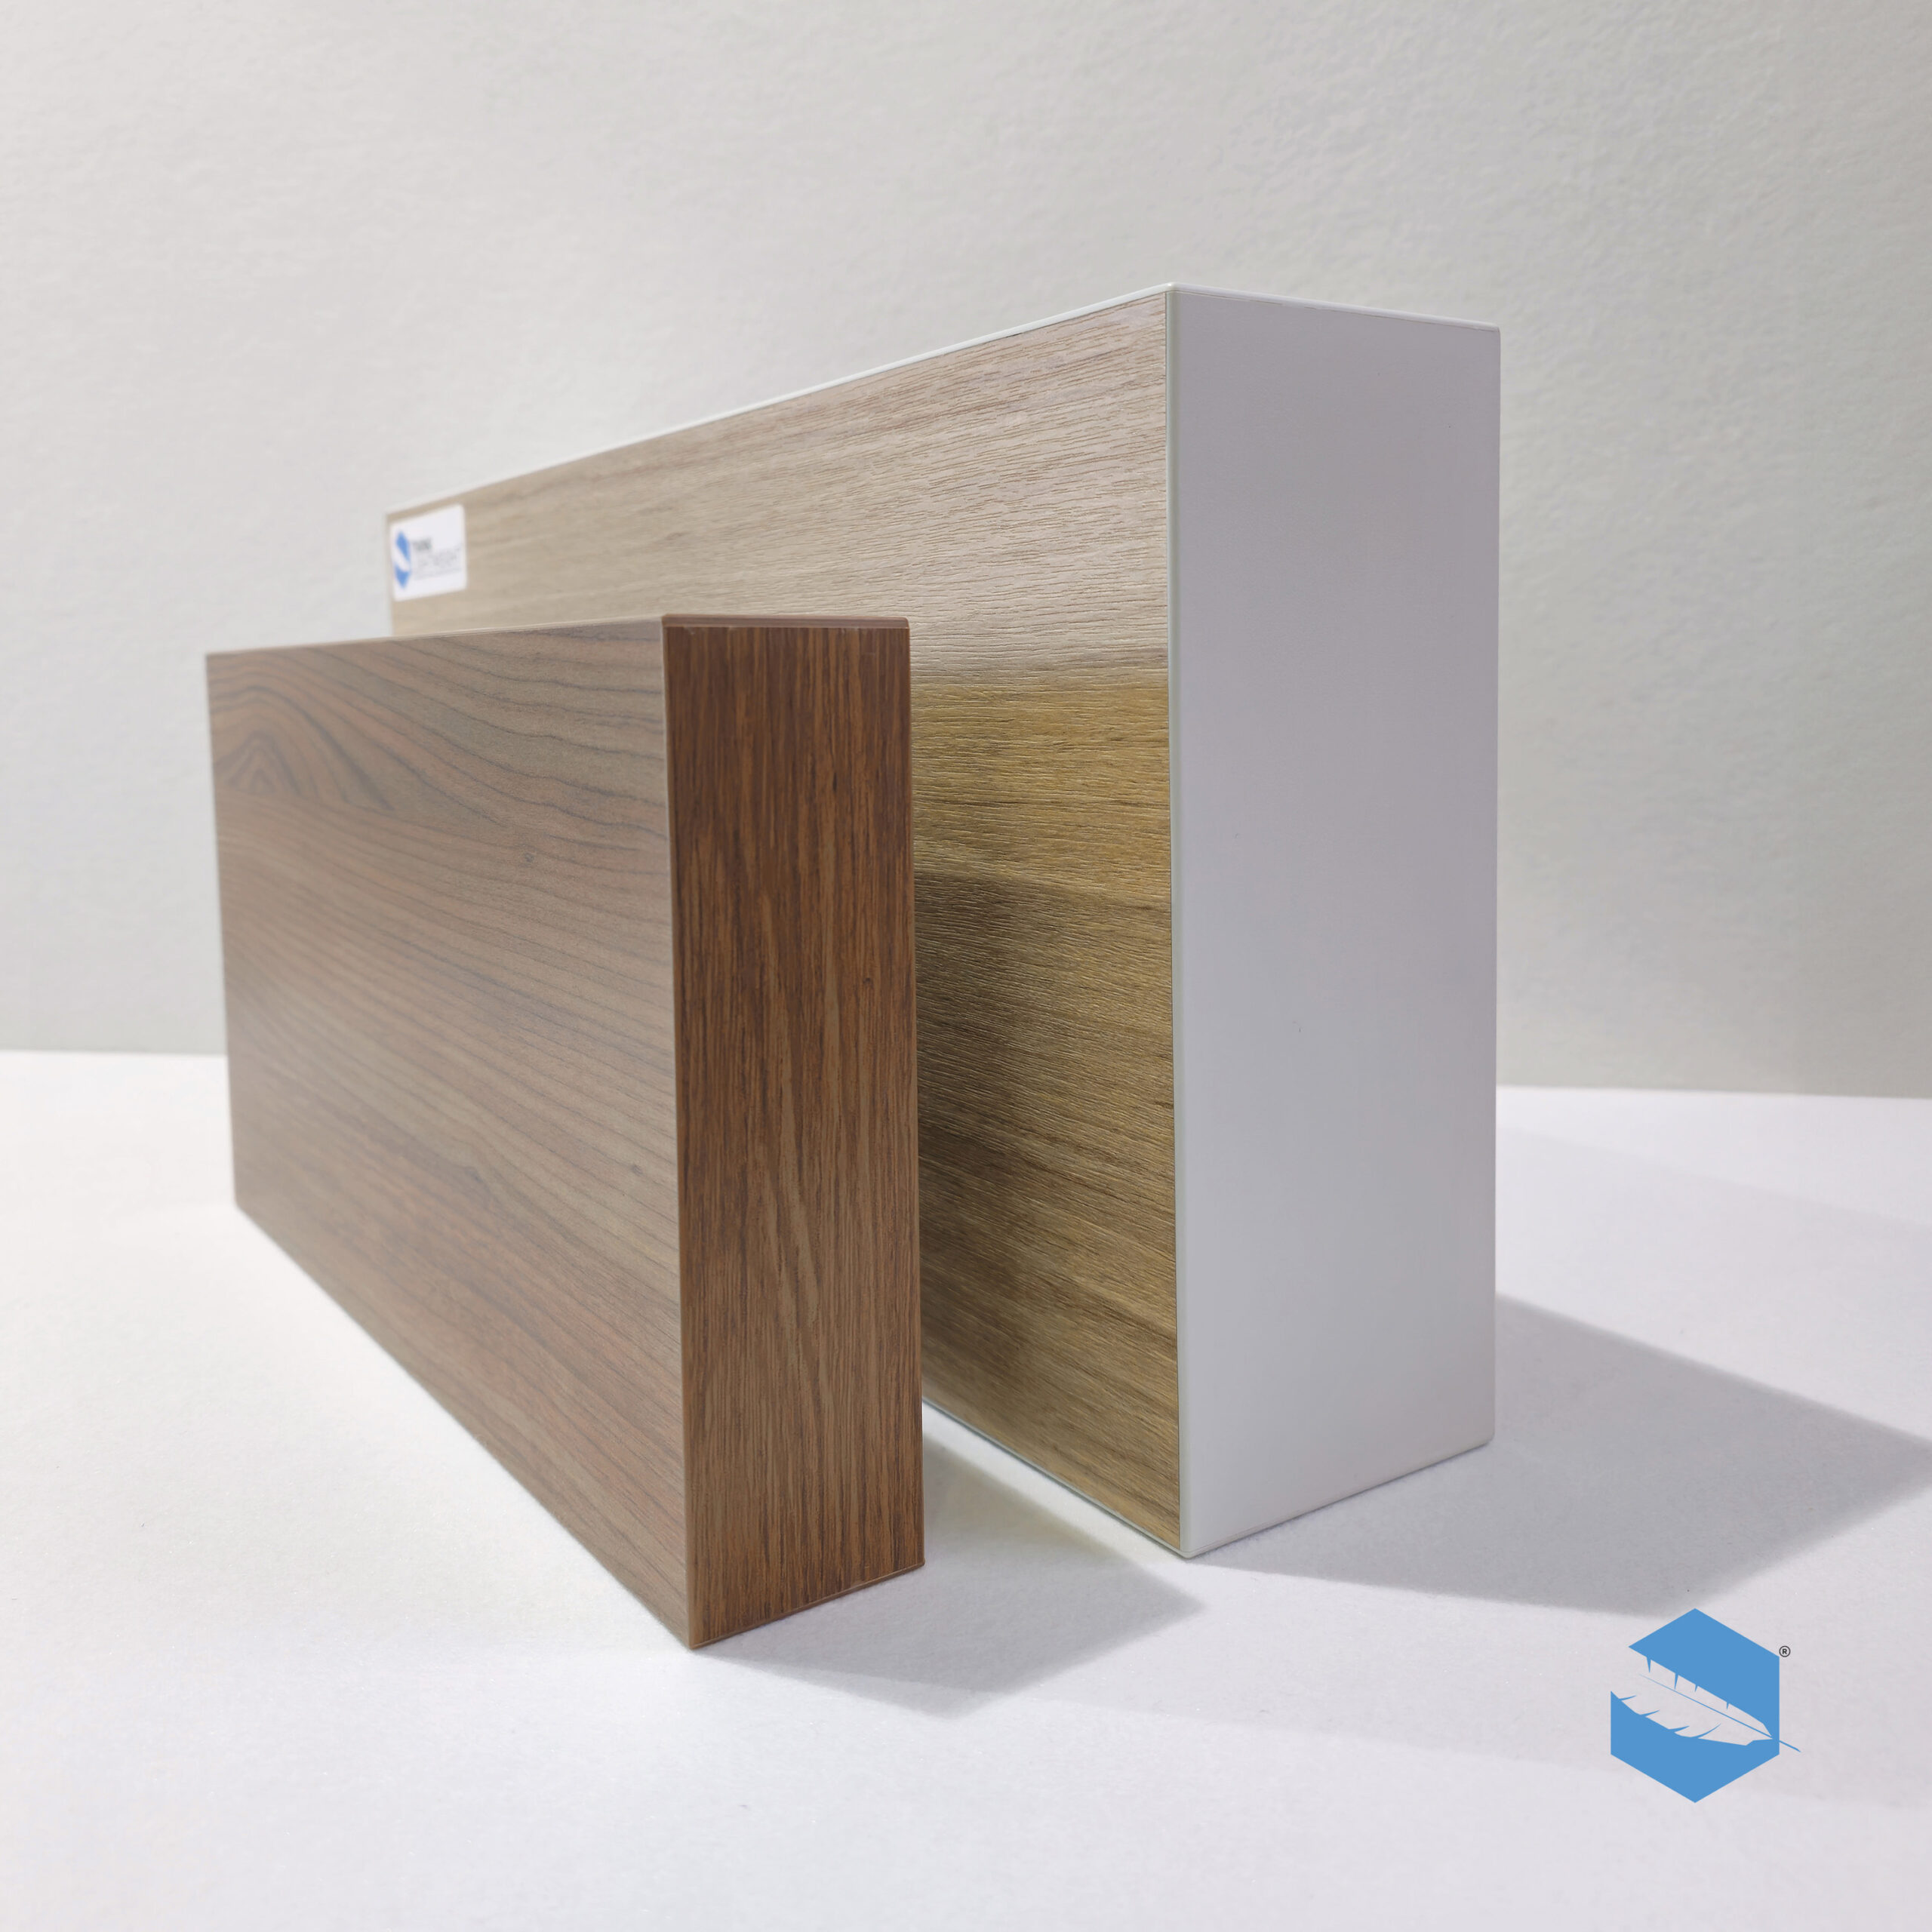 Think Lightweight Lightweight Panel Solutions Wood Panel Manufacturer Laminate Solutions Hollow Core Wood Panels Lightweight Panel Technology Honeycomb Core Wood Panels